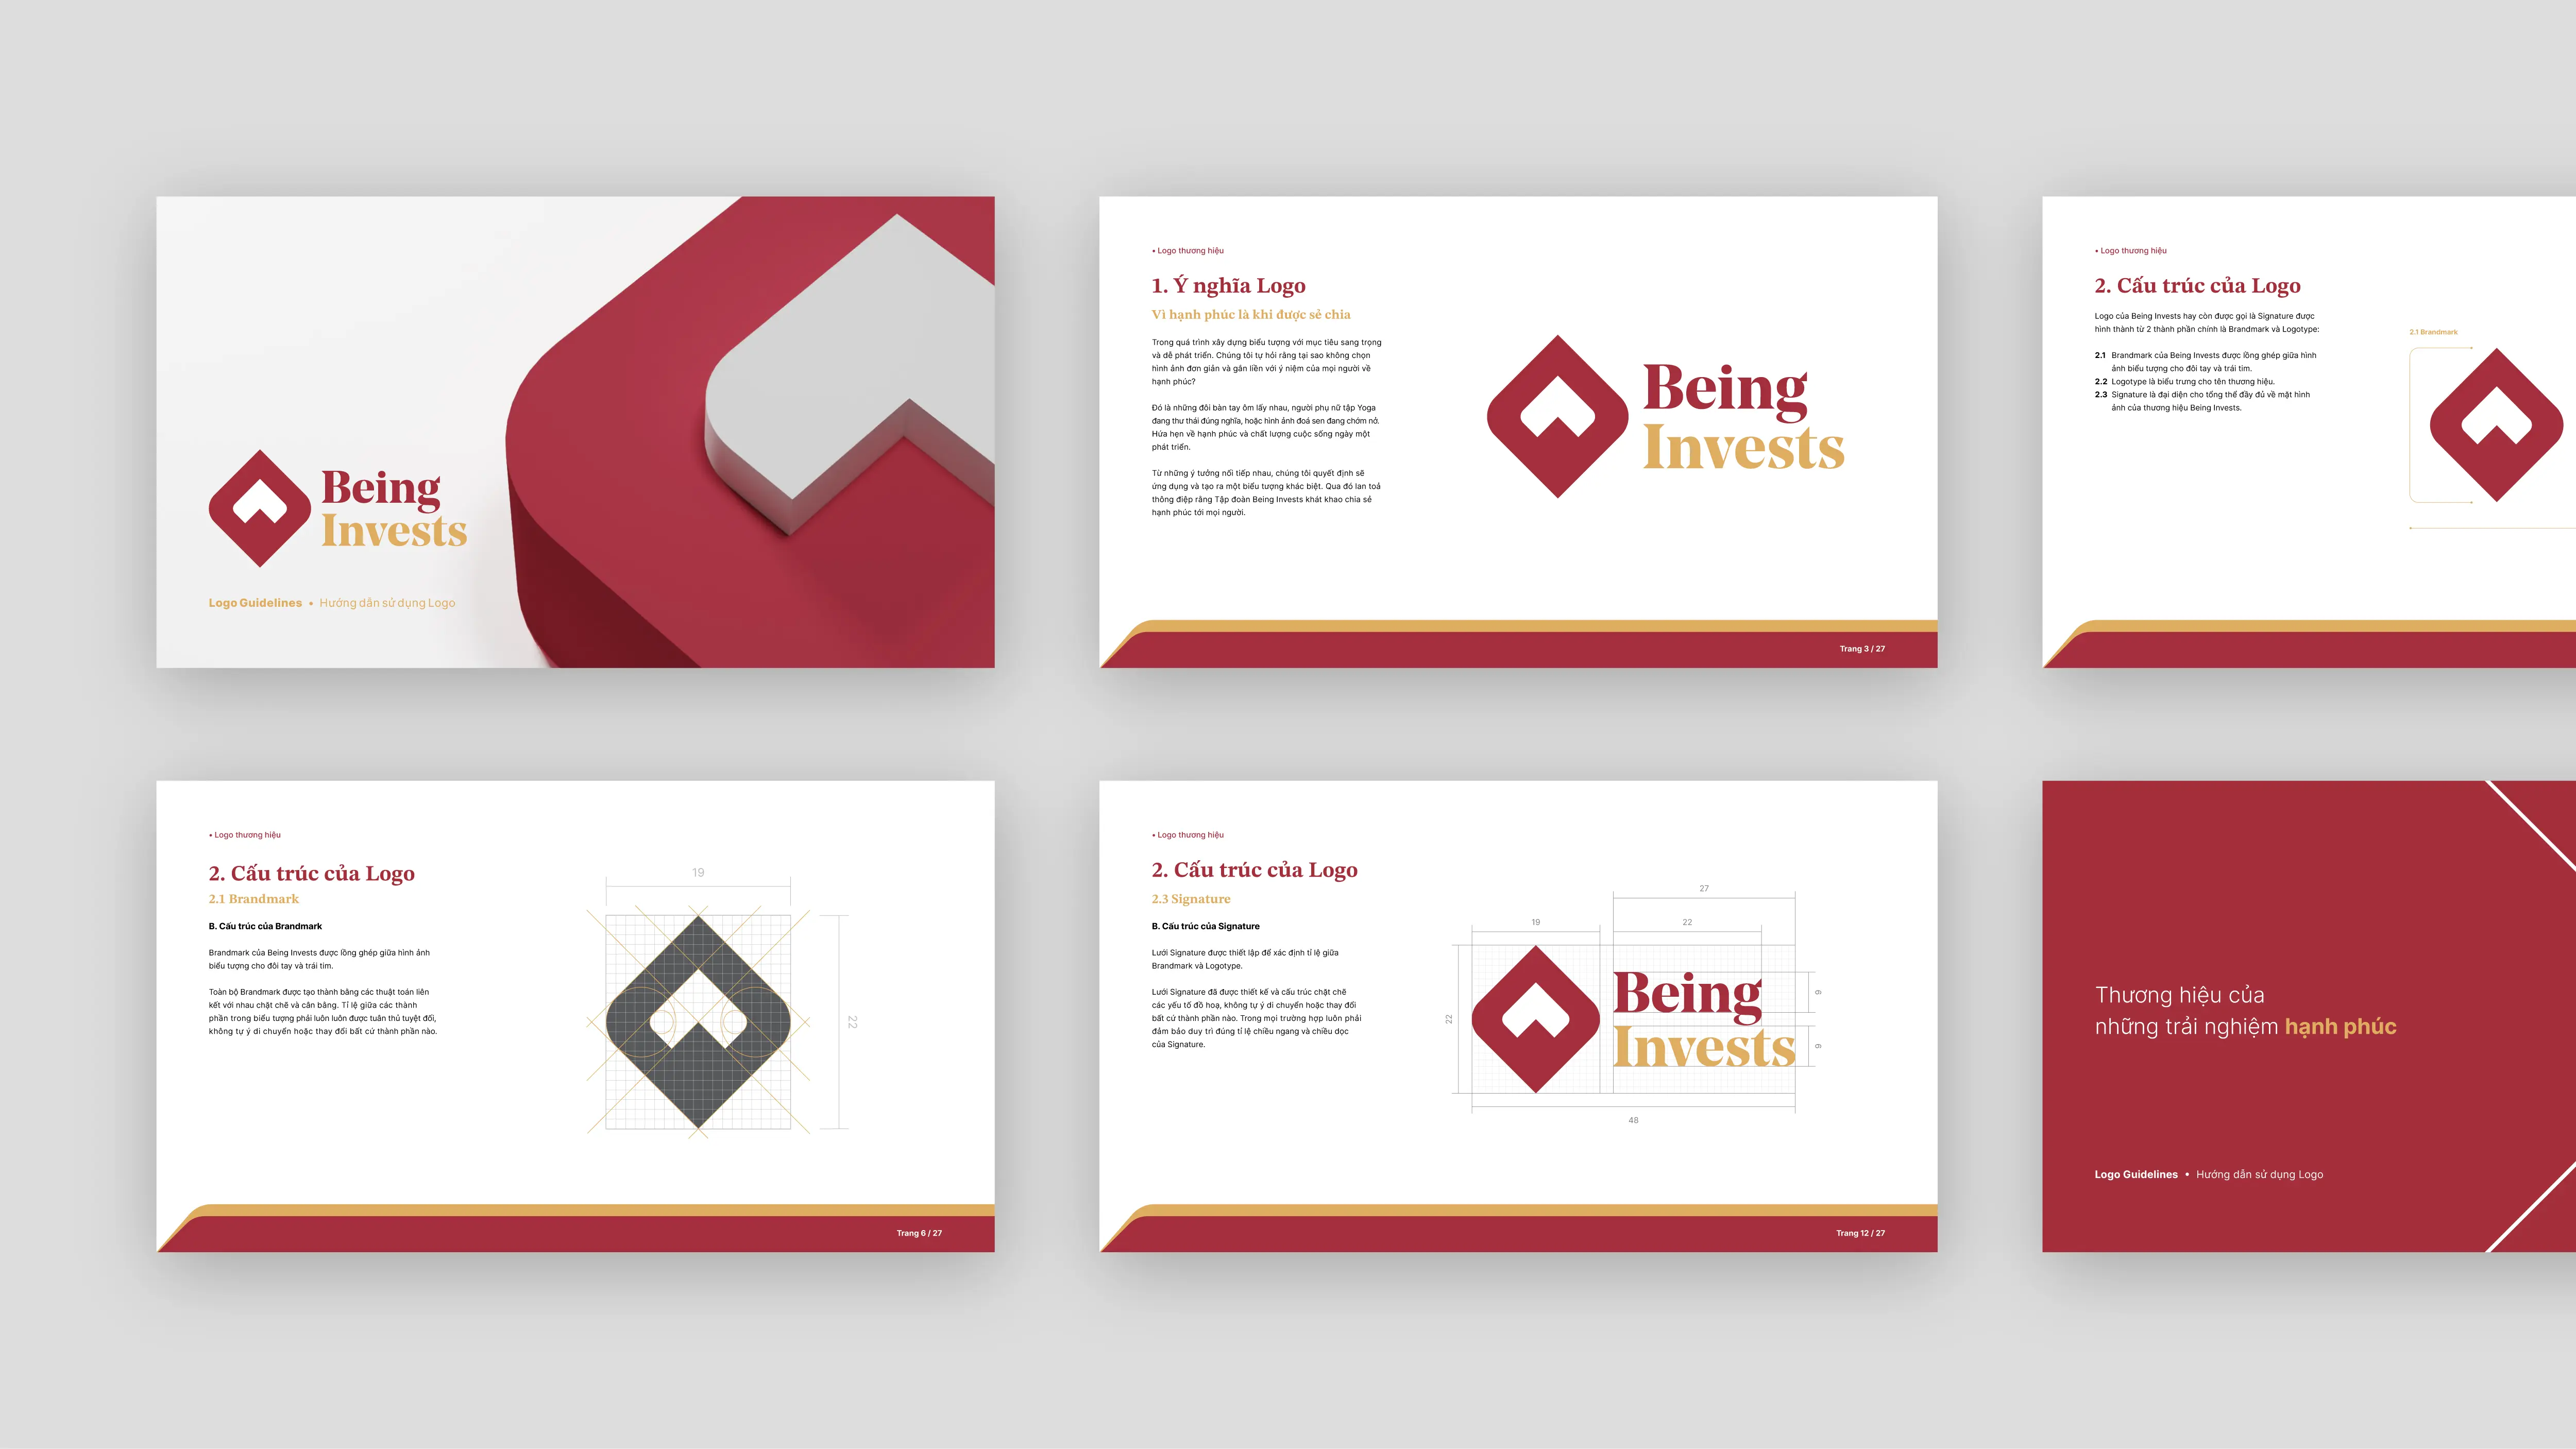 Being Invests